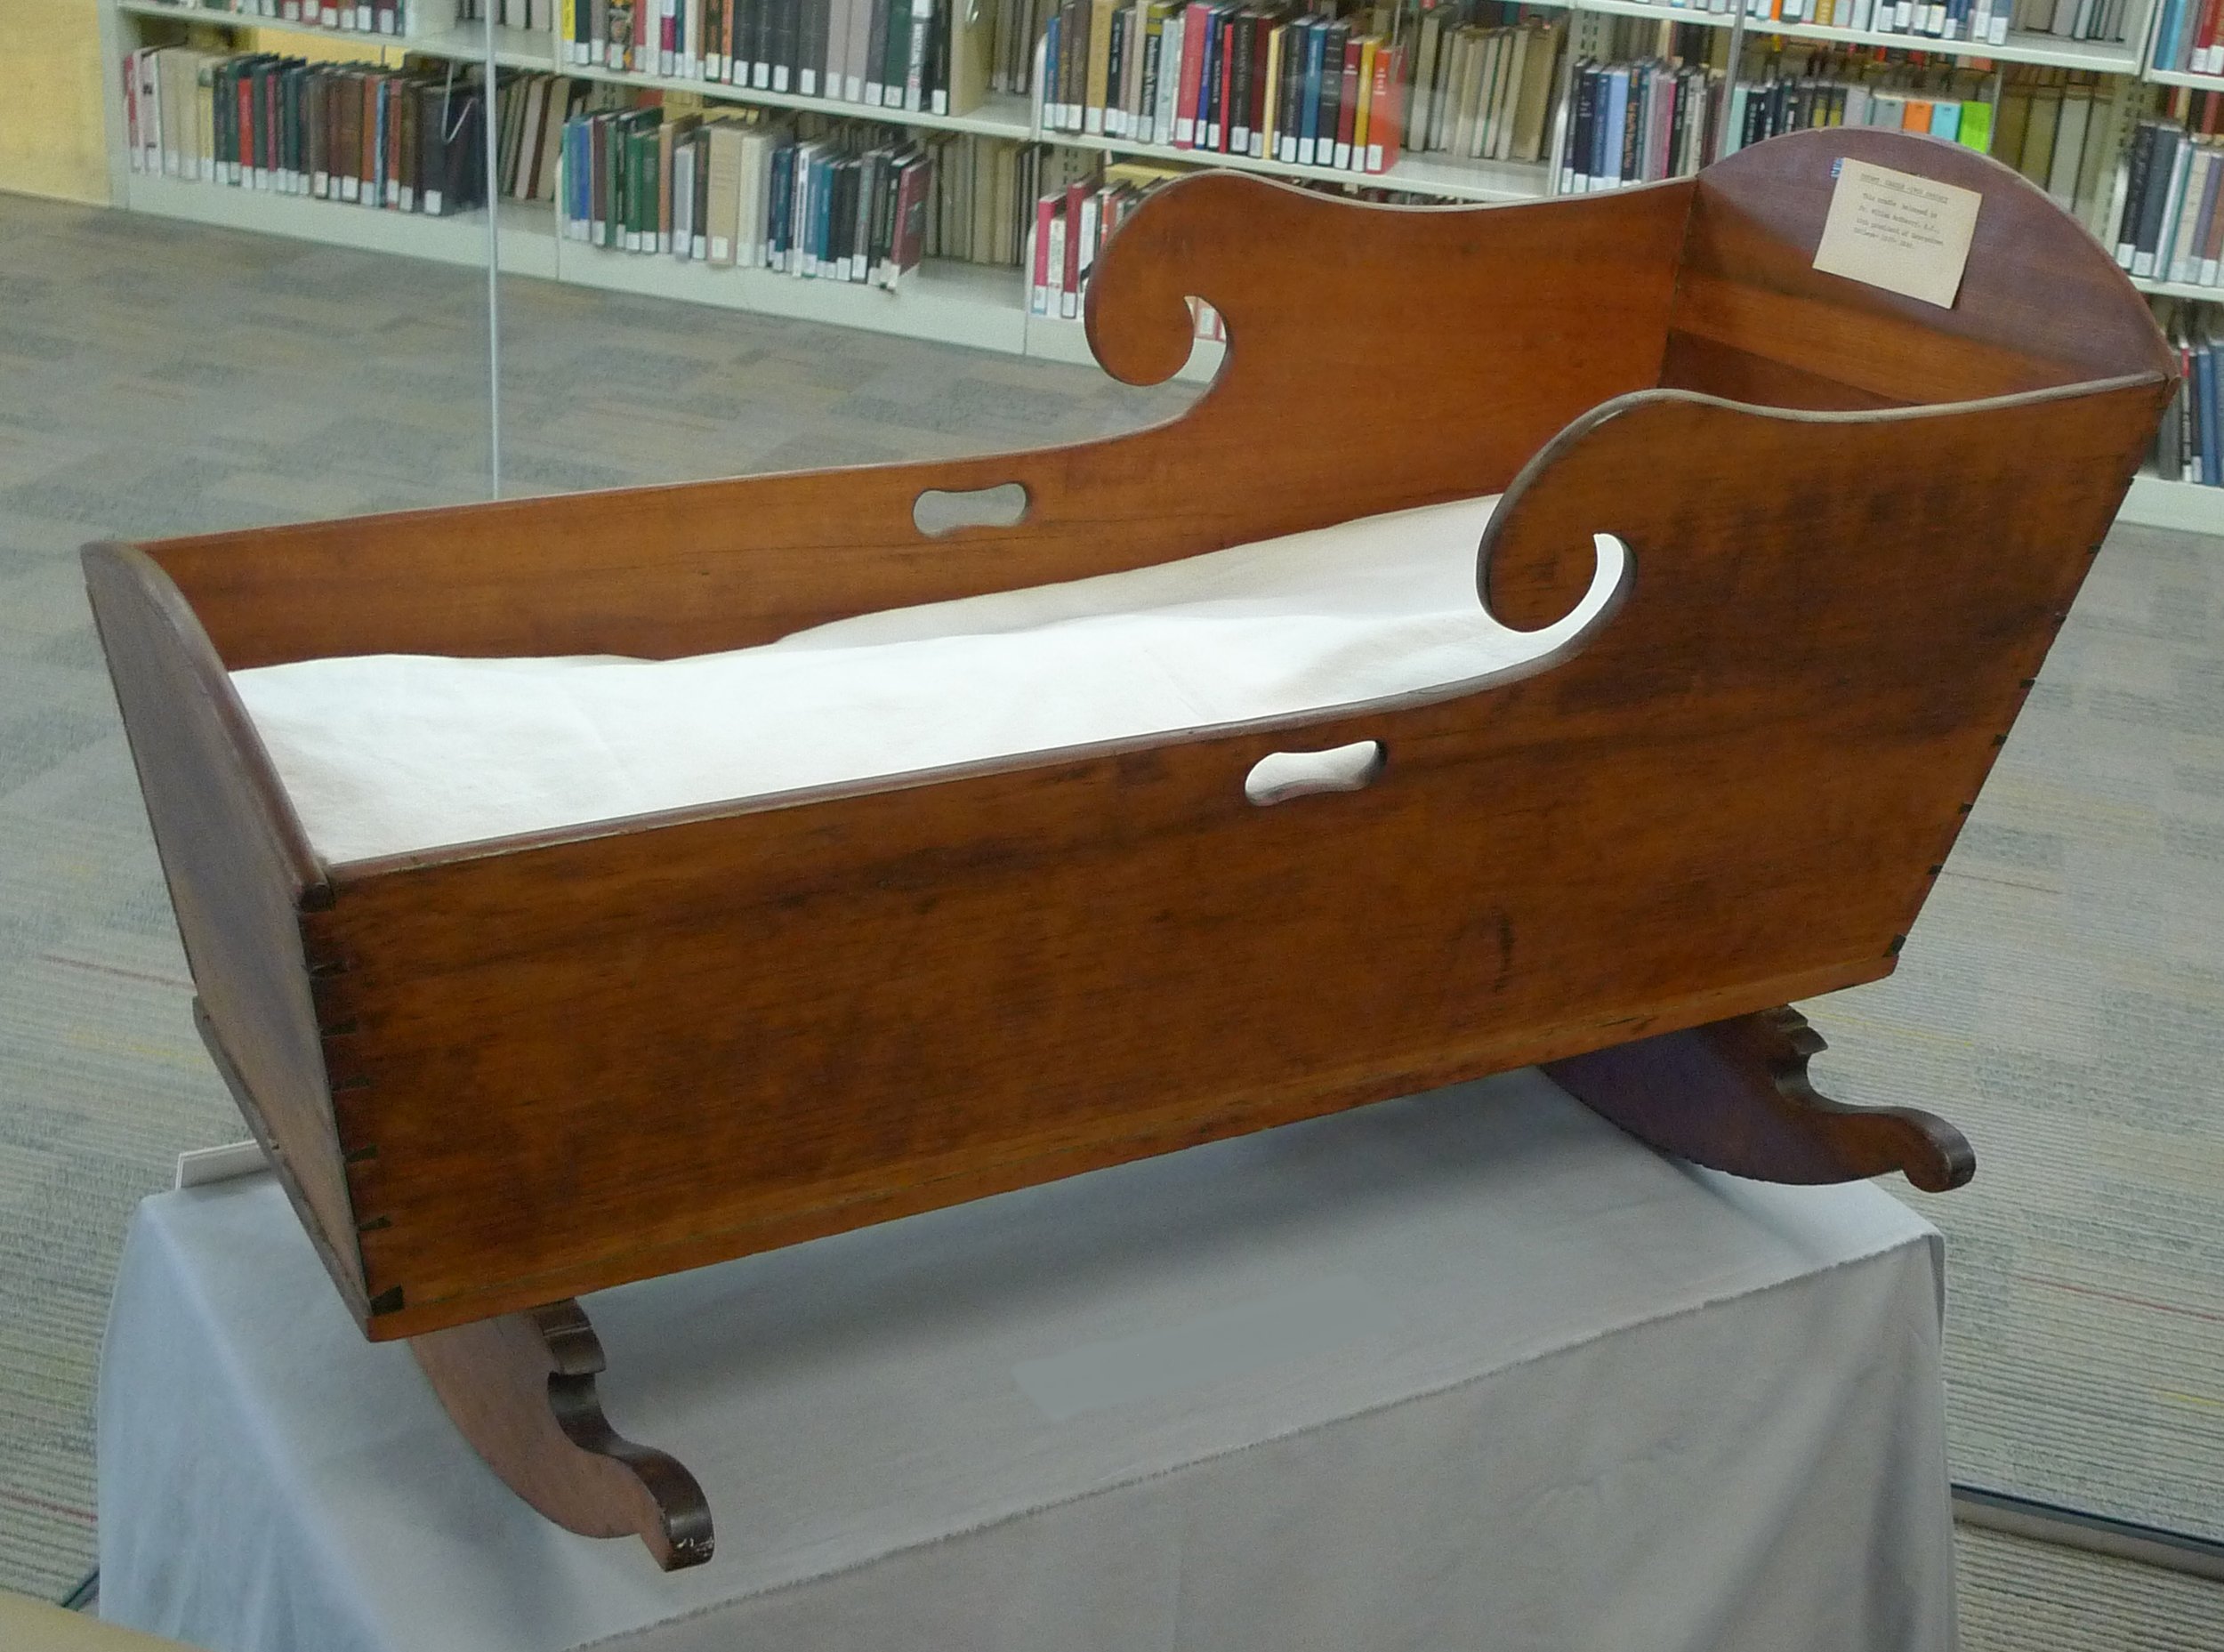  The cradle of Anastasia McSherry’s infant son that was attacked by an unseen force. The child would grow up to be Rev. William McSherry, once president of Georgetown College. 